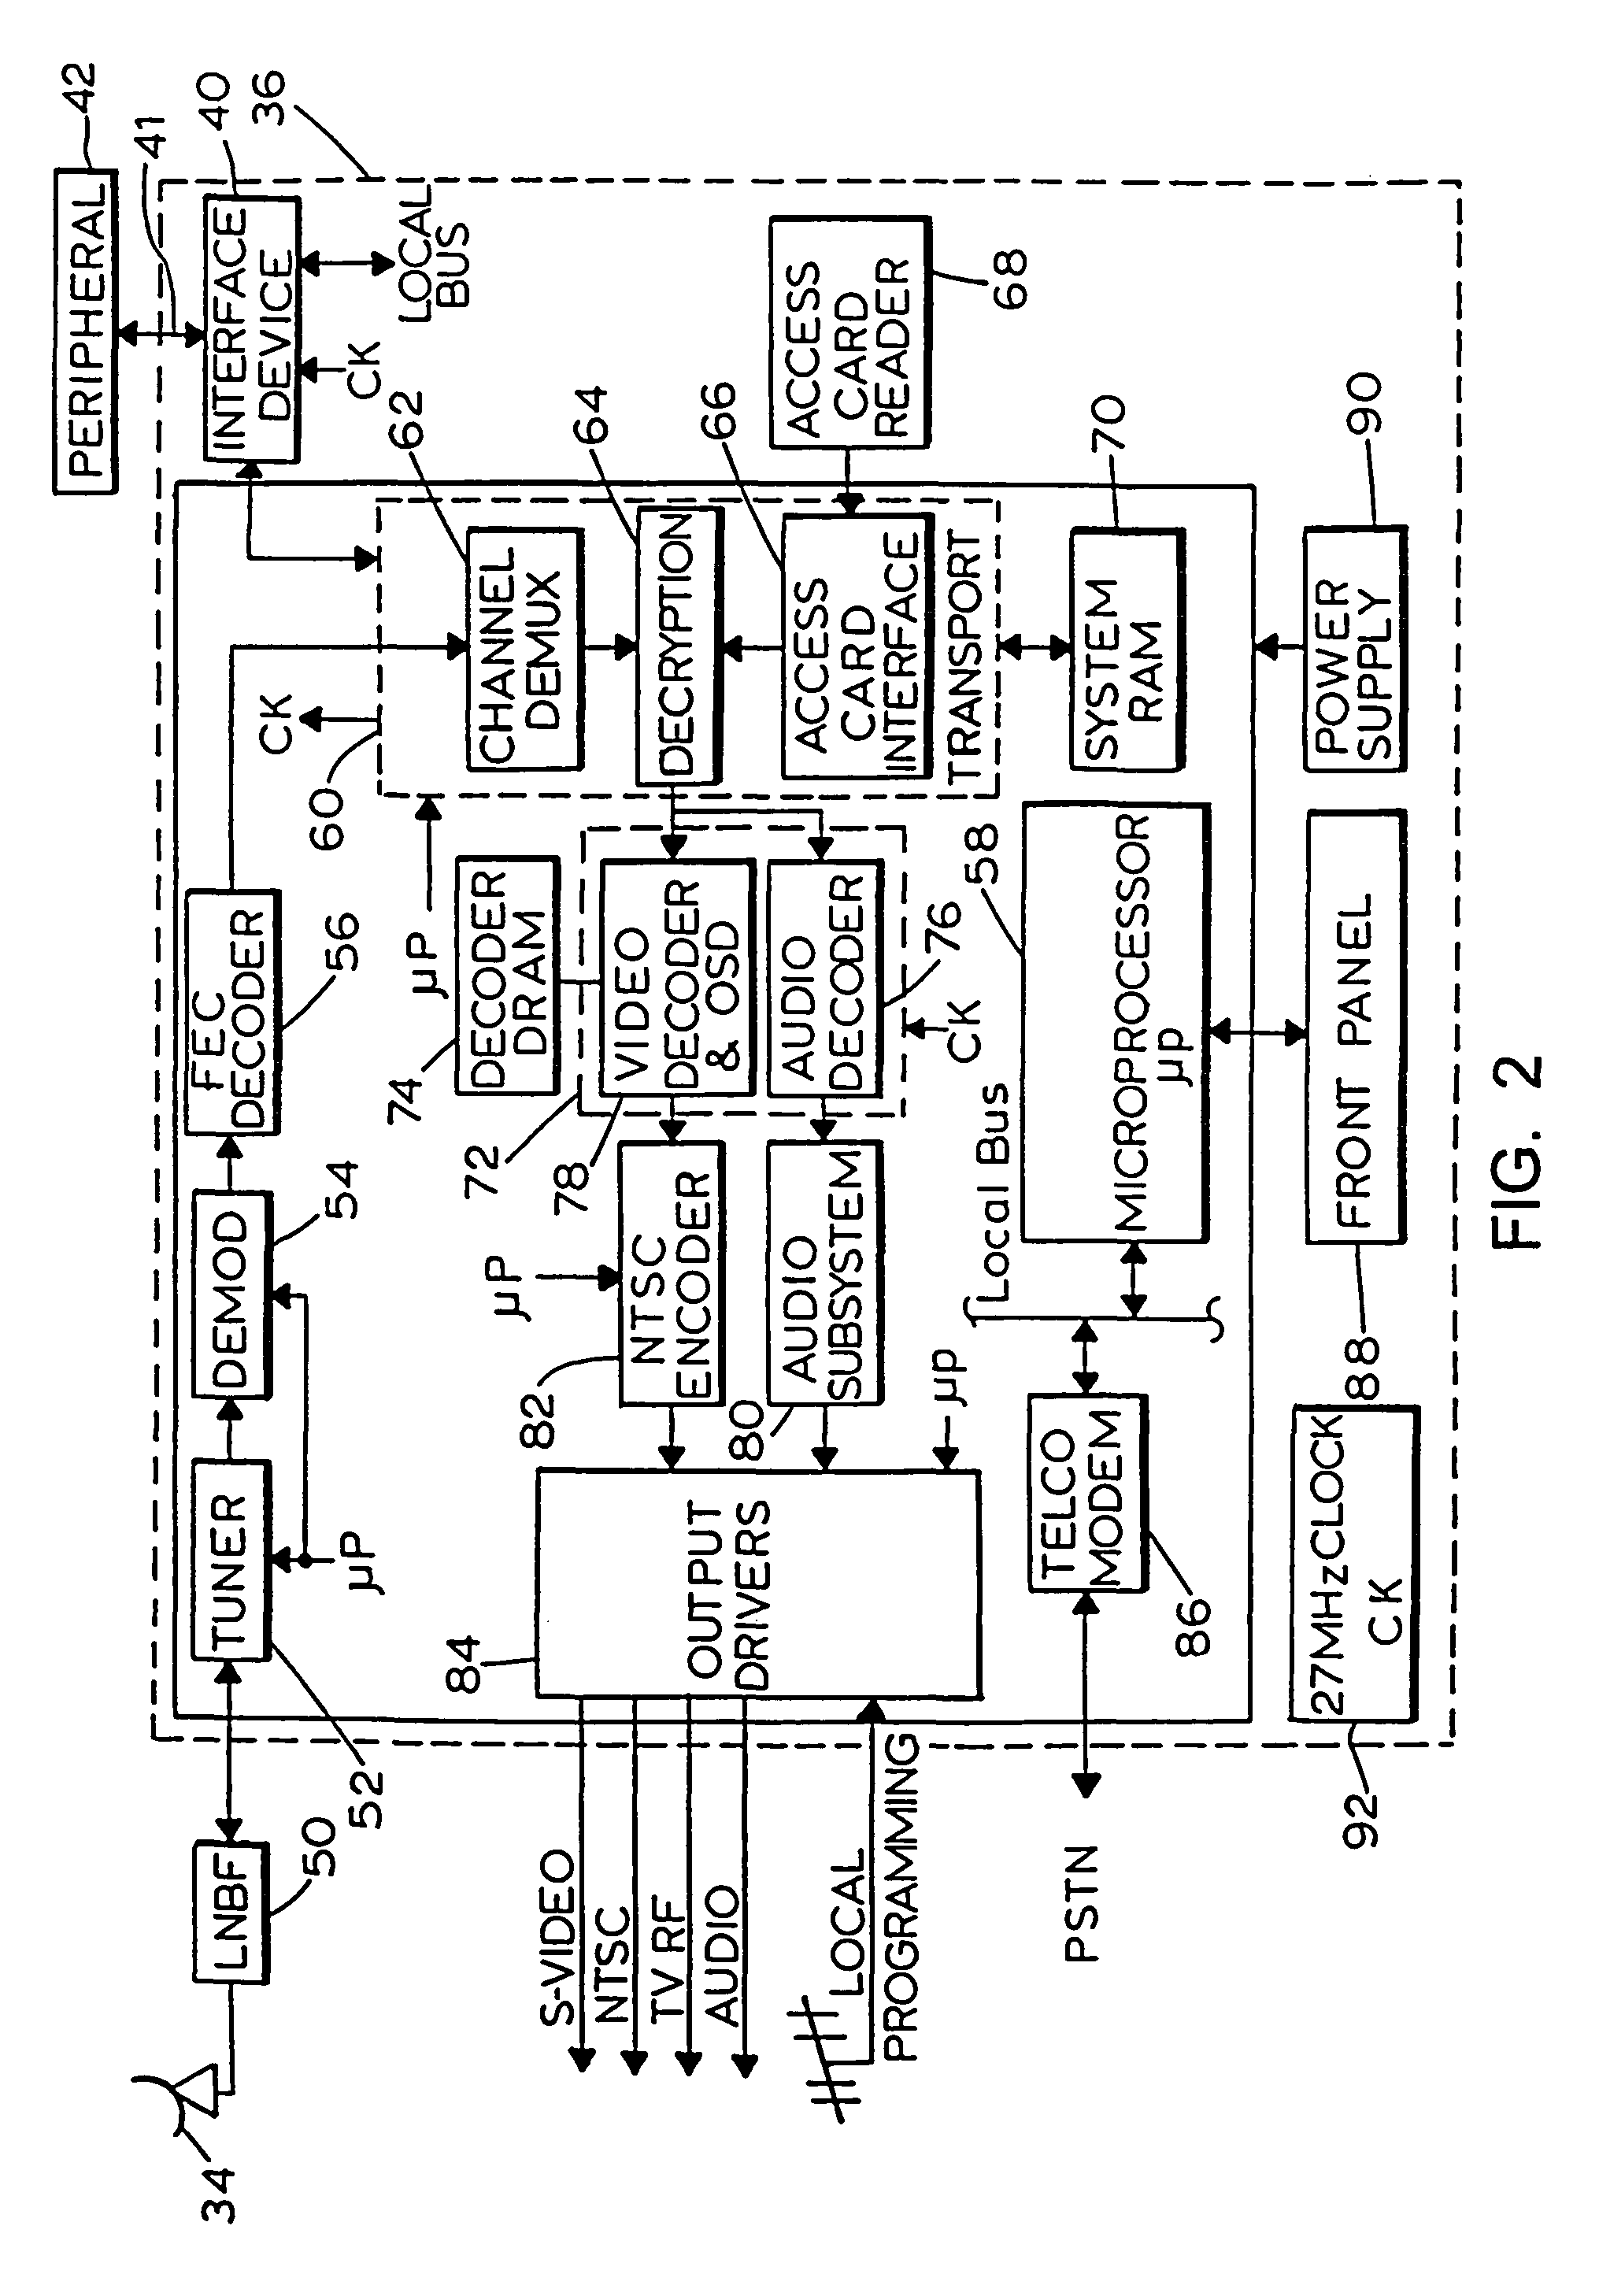 System and method for transmitting, receiving and displaying advertisements